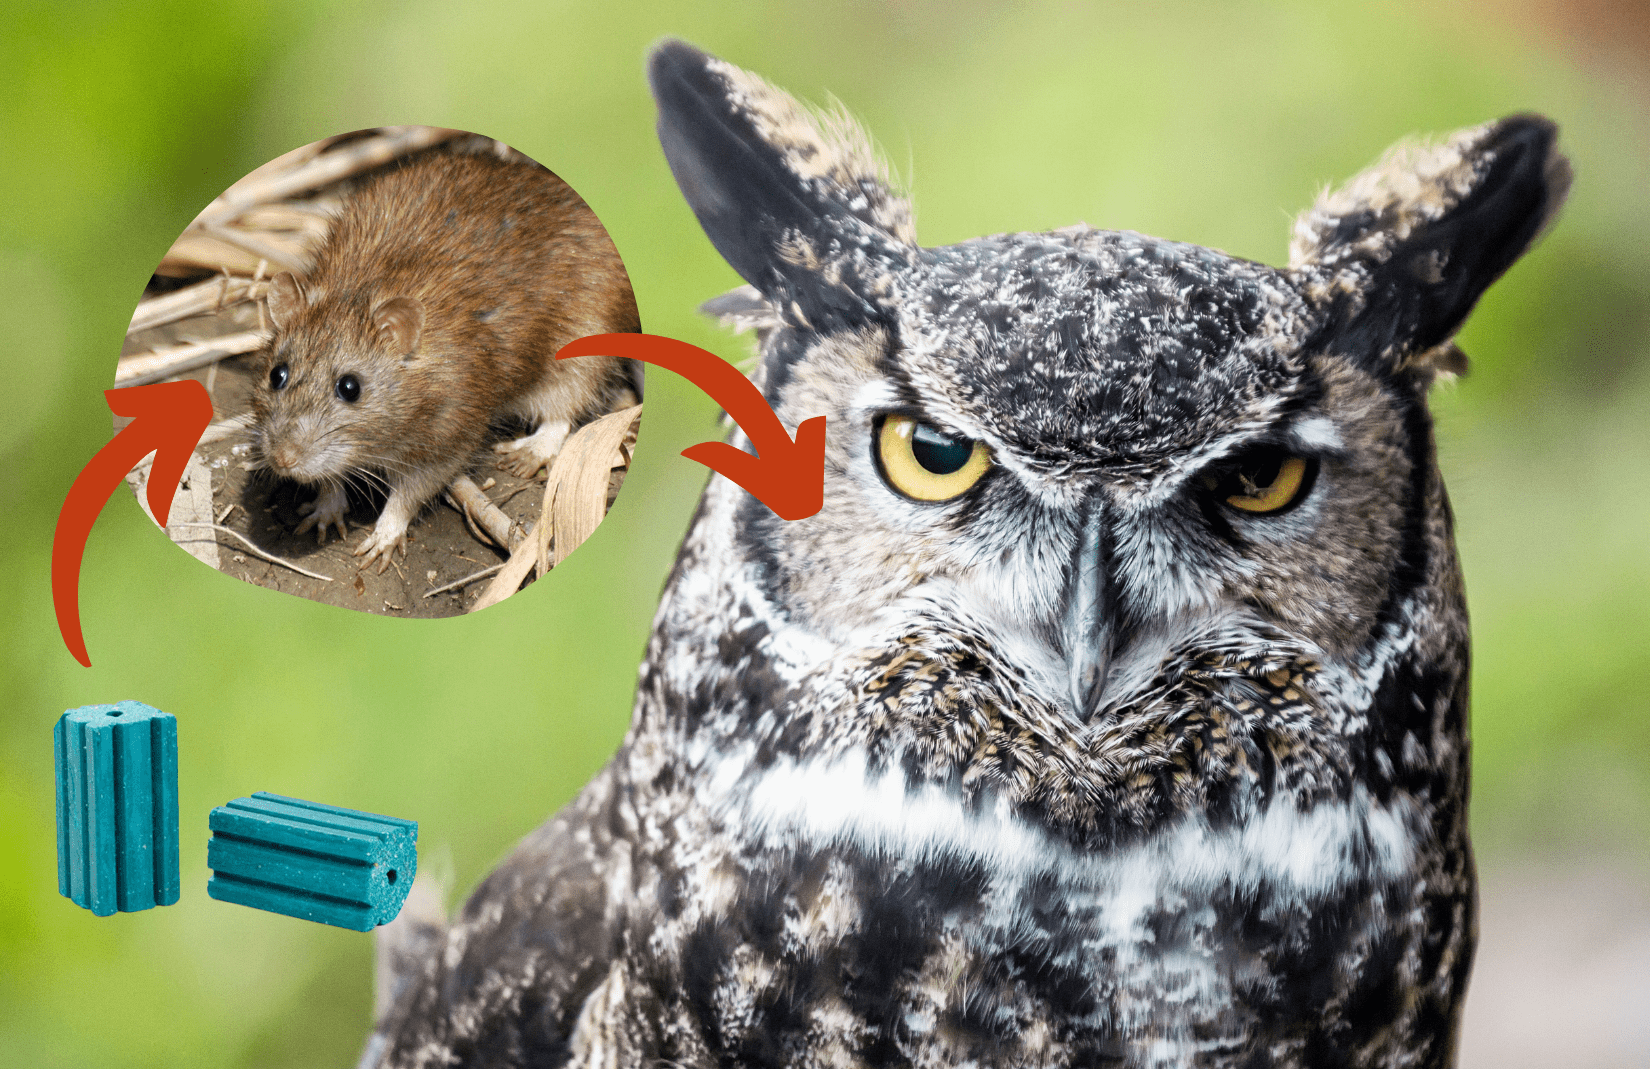 Cycle of secondary poisoning - great horned owl next to Norway rat and blue rodenticide blocks.